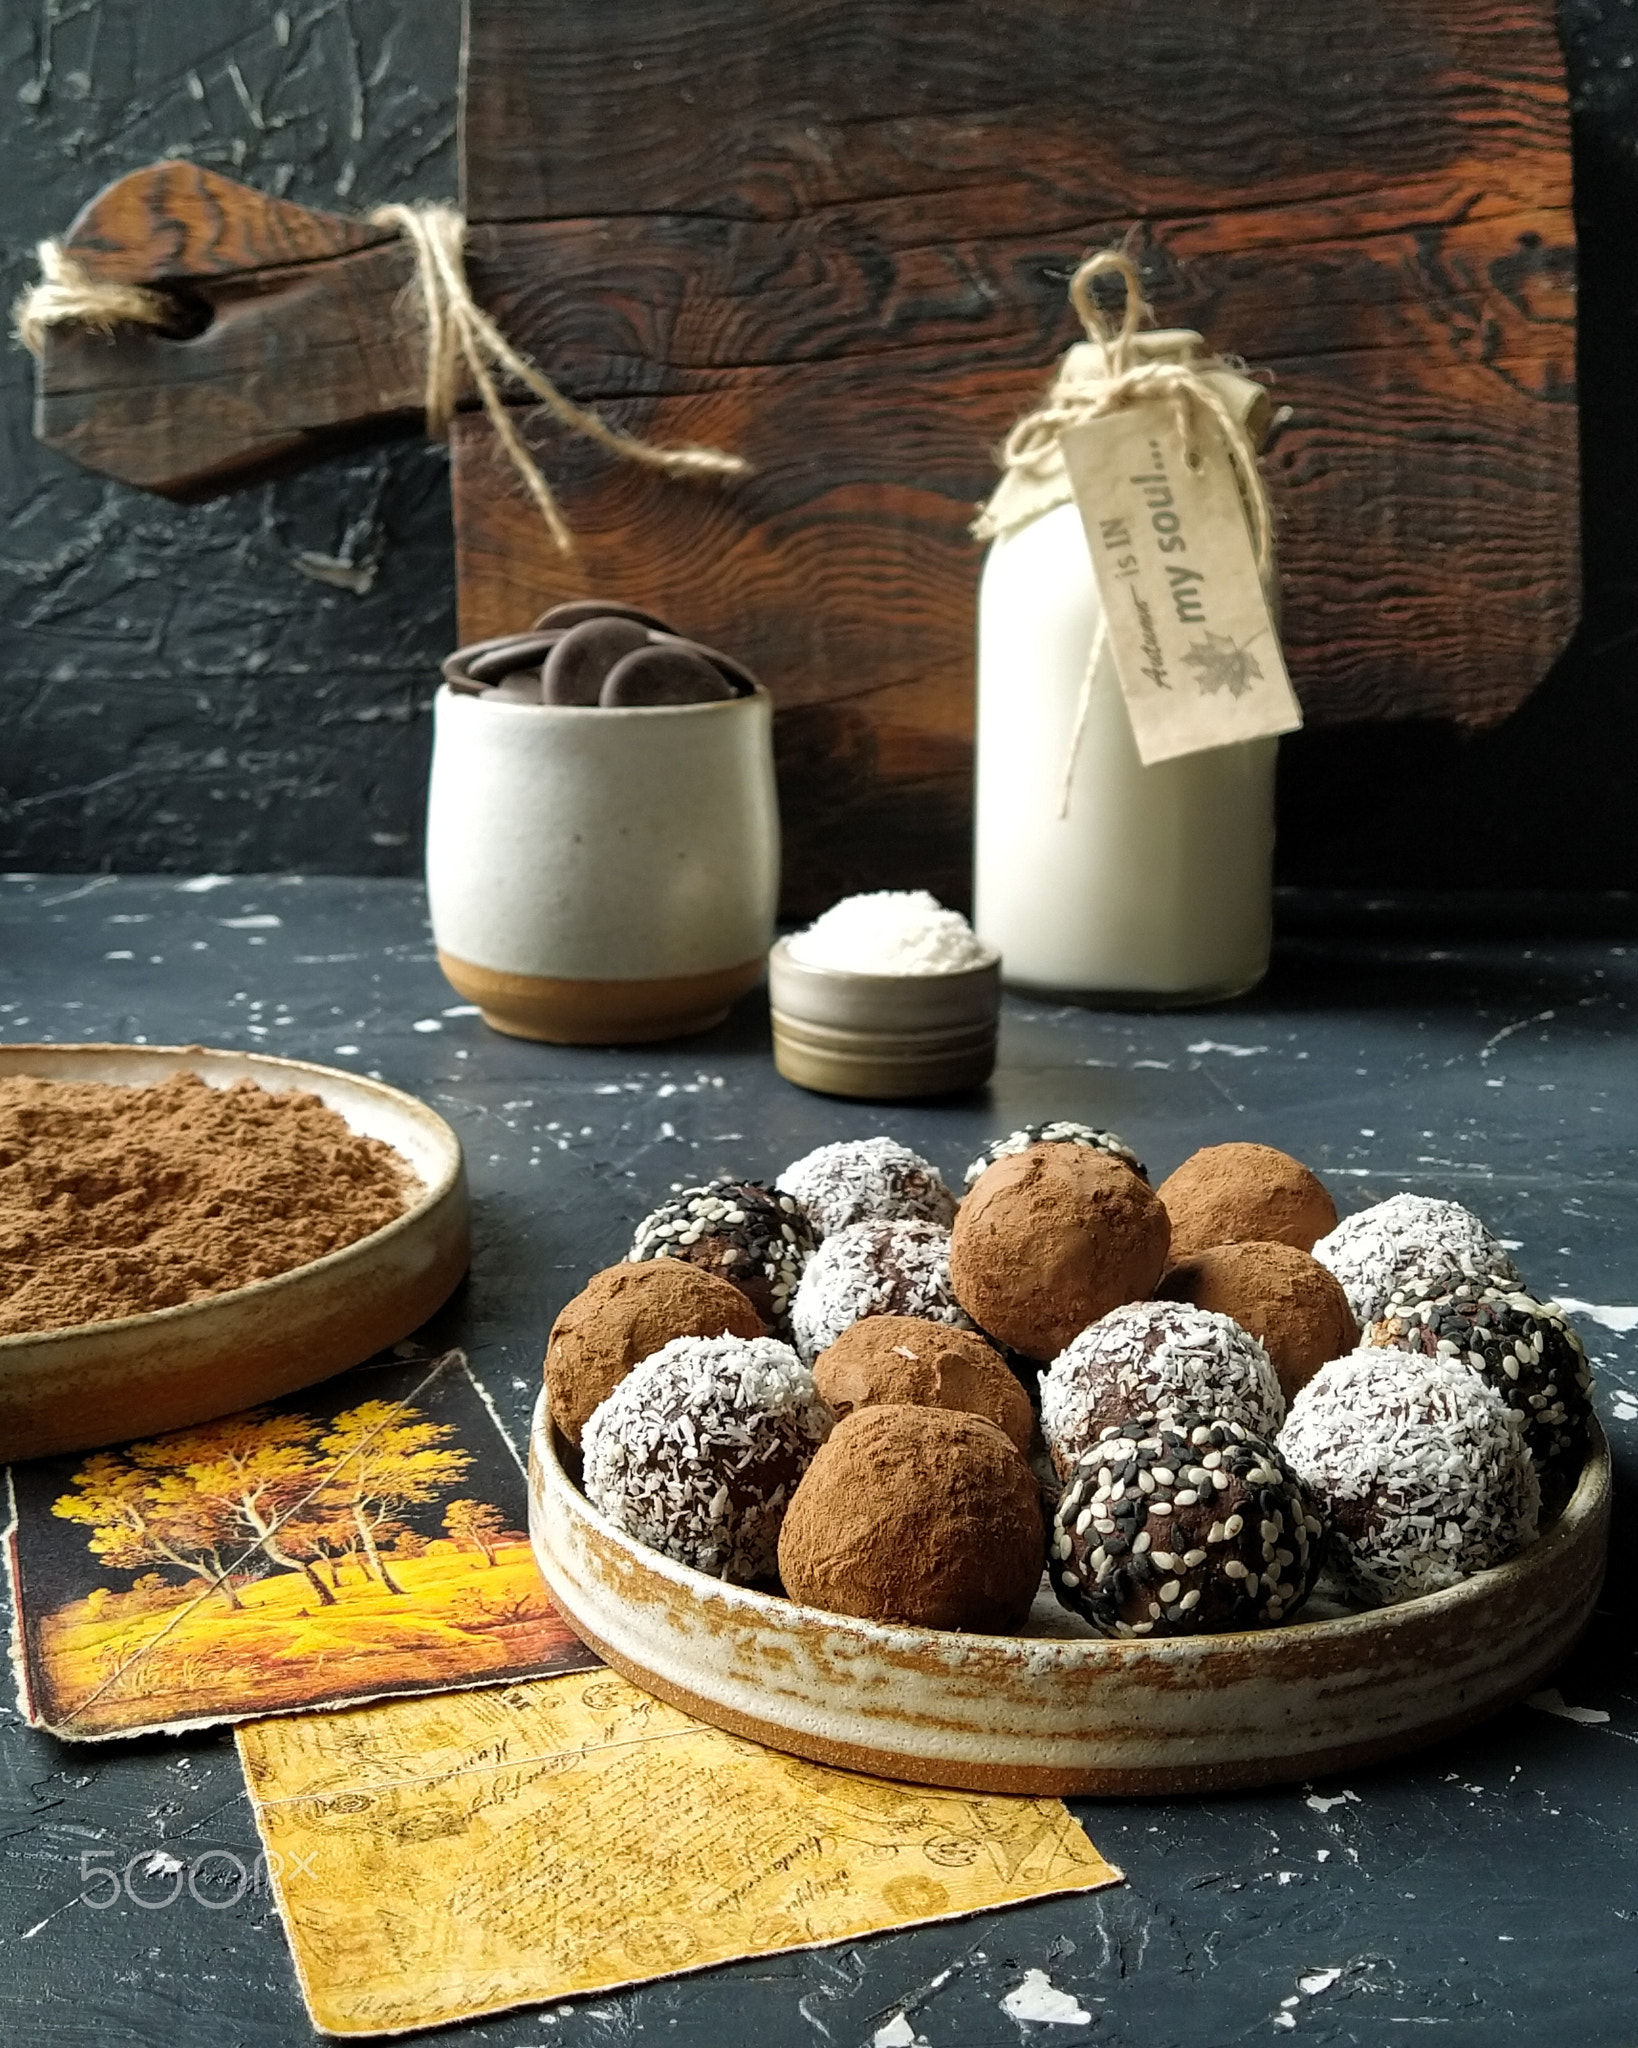 Chocolate truffles with cooking ingredients on a dark background.